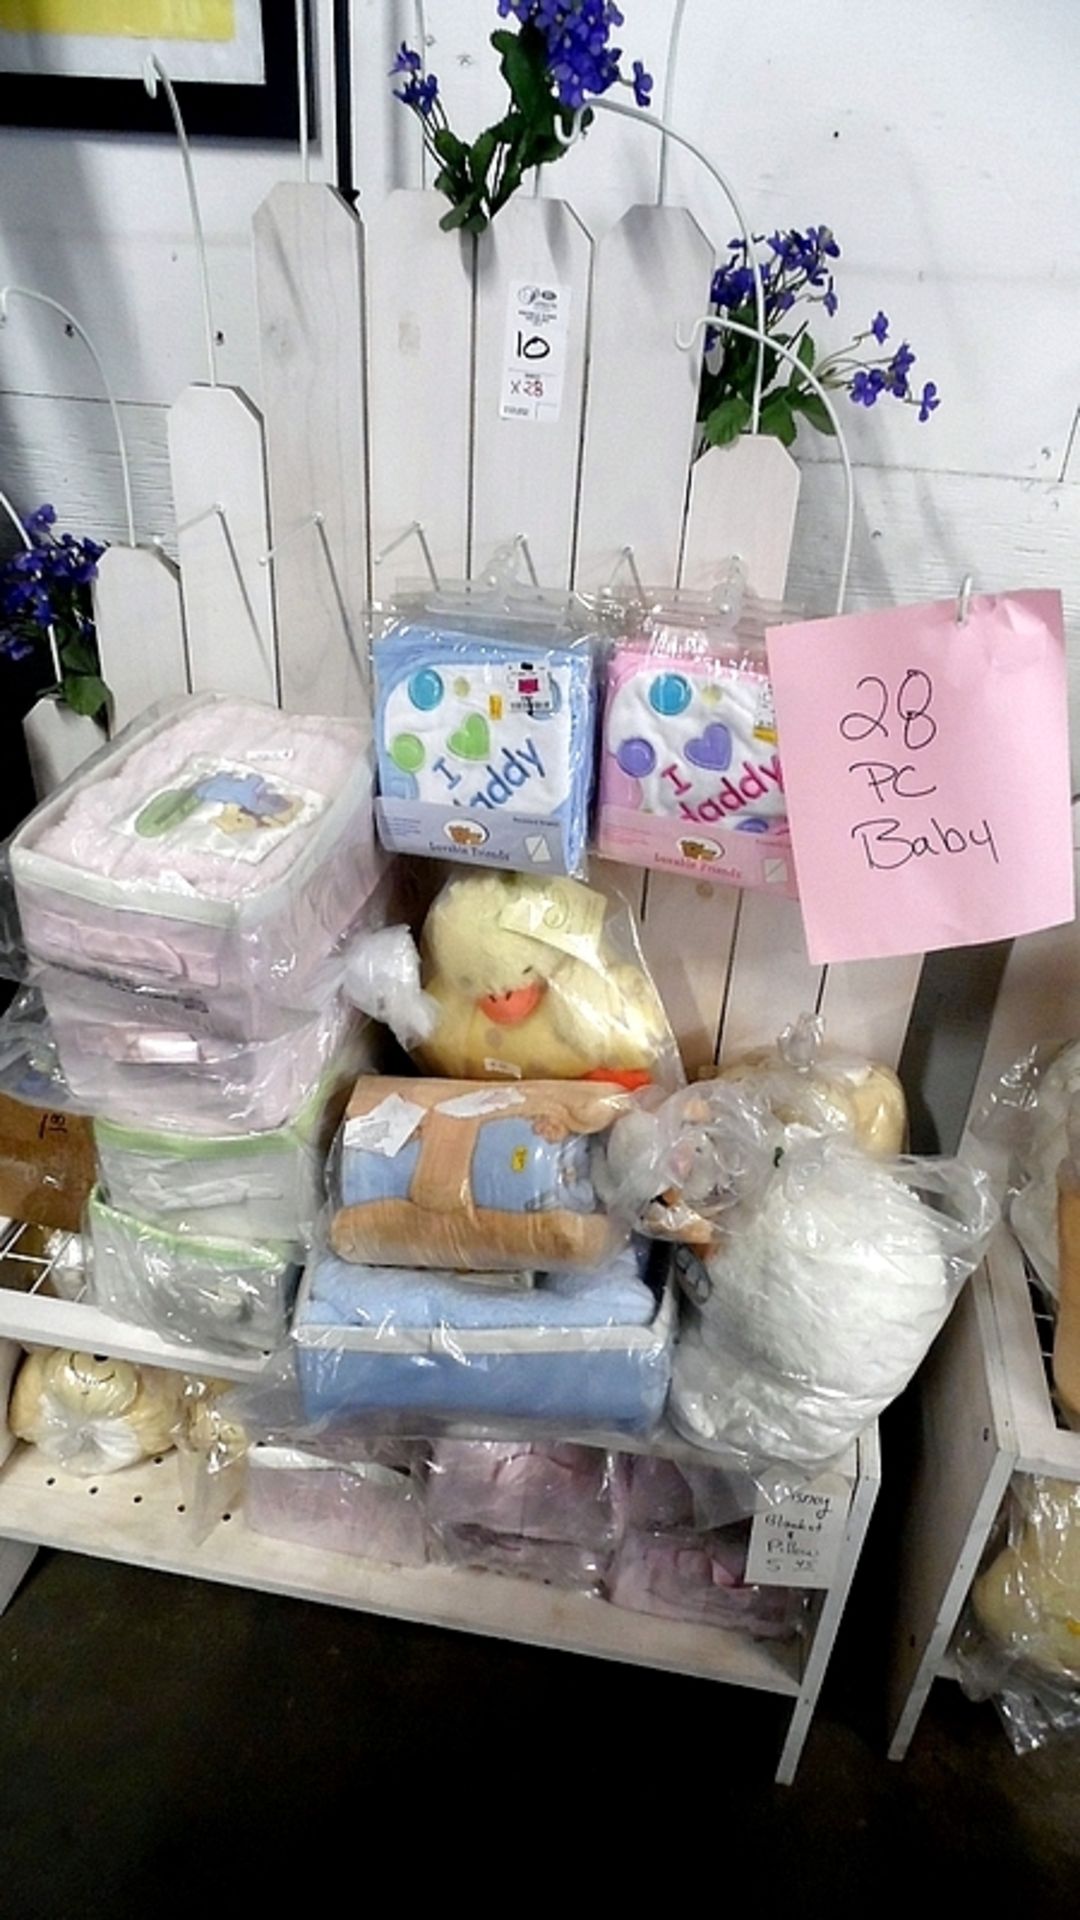 ASSORTED BABY ITEMS w/ RACK